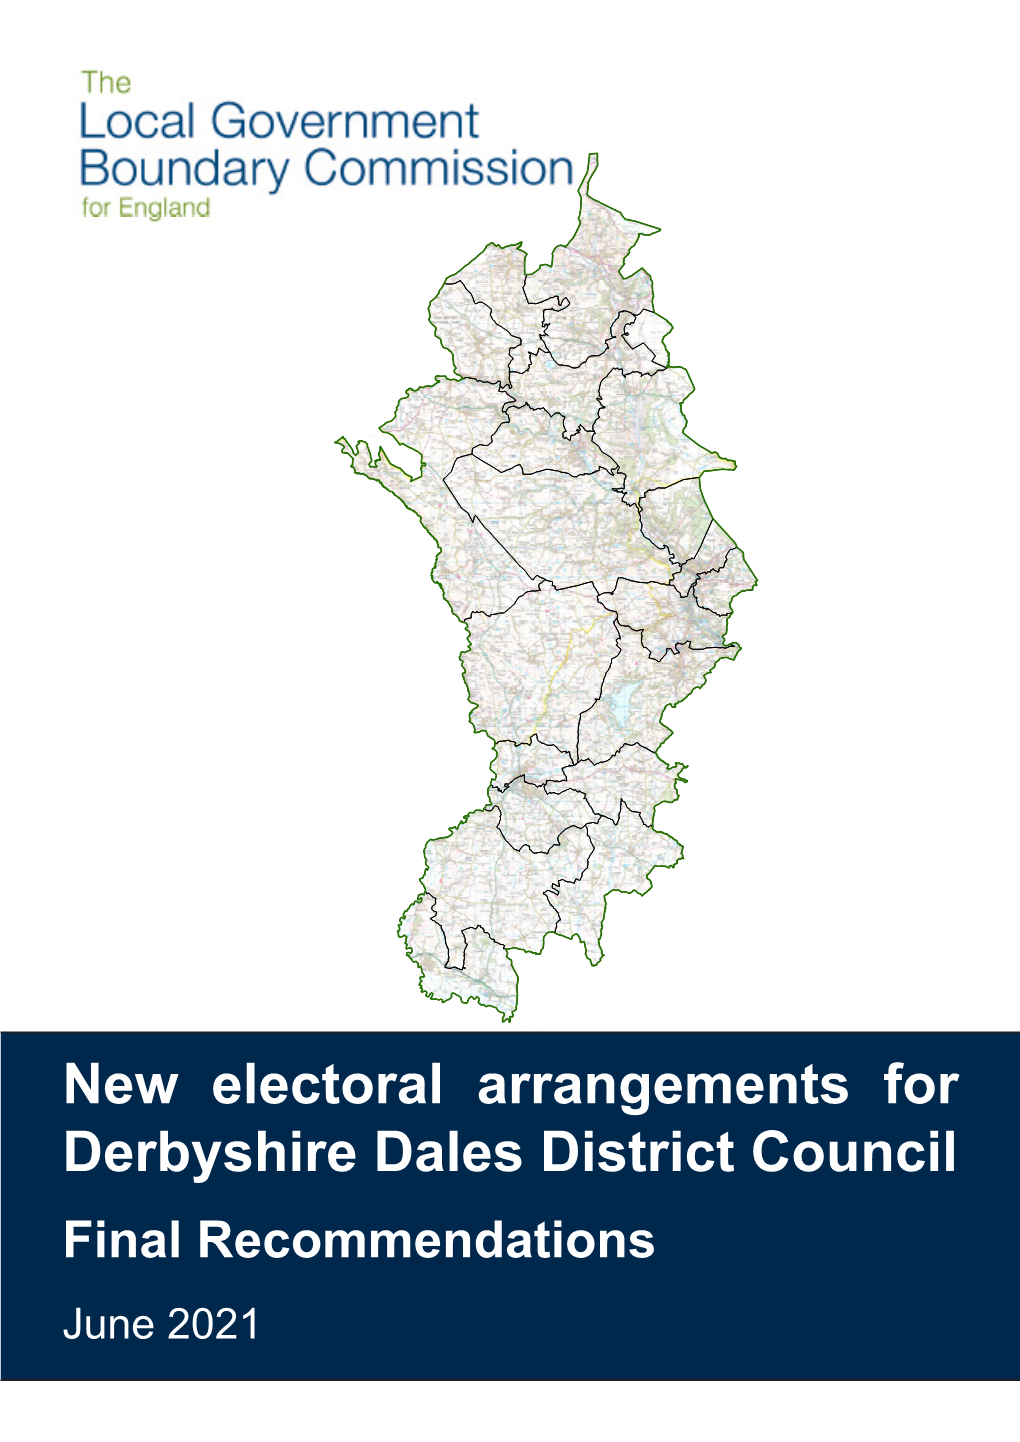 Final Recommendations Report for Derbyshire Dales District Council